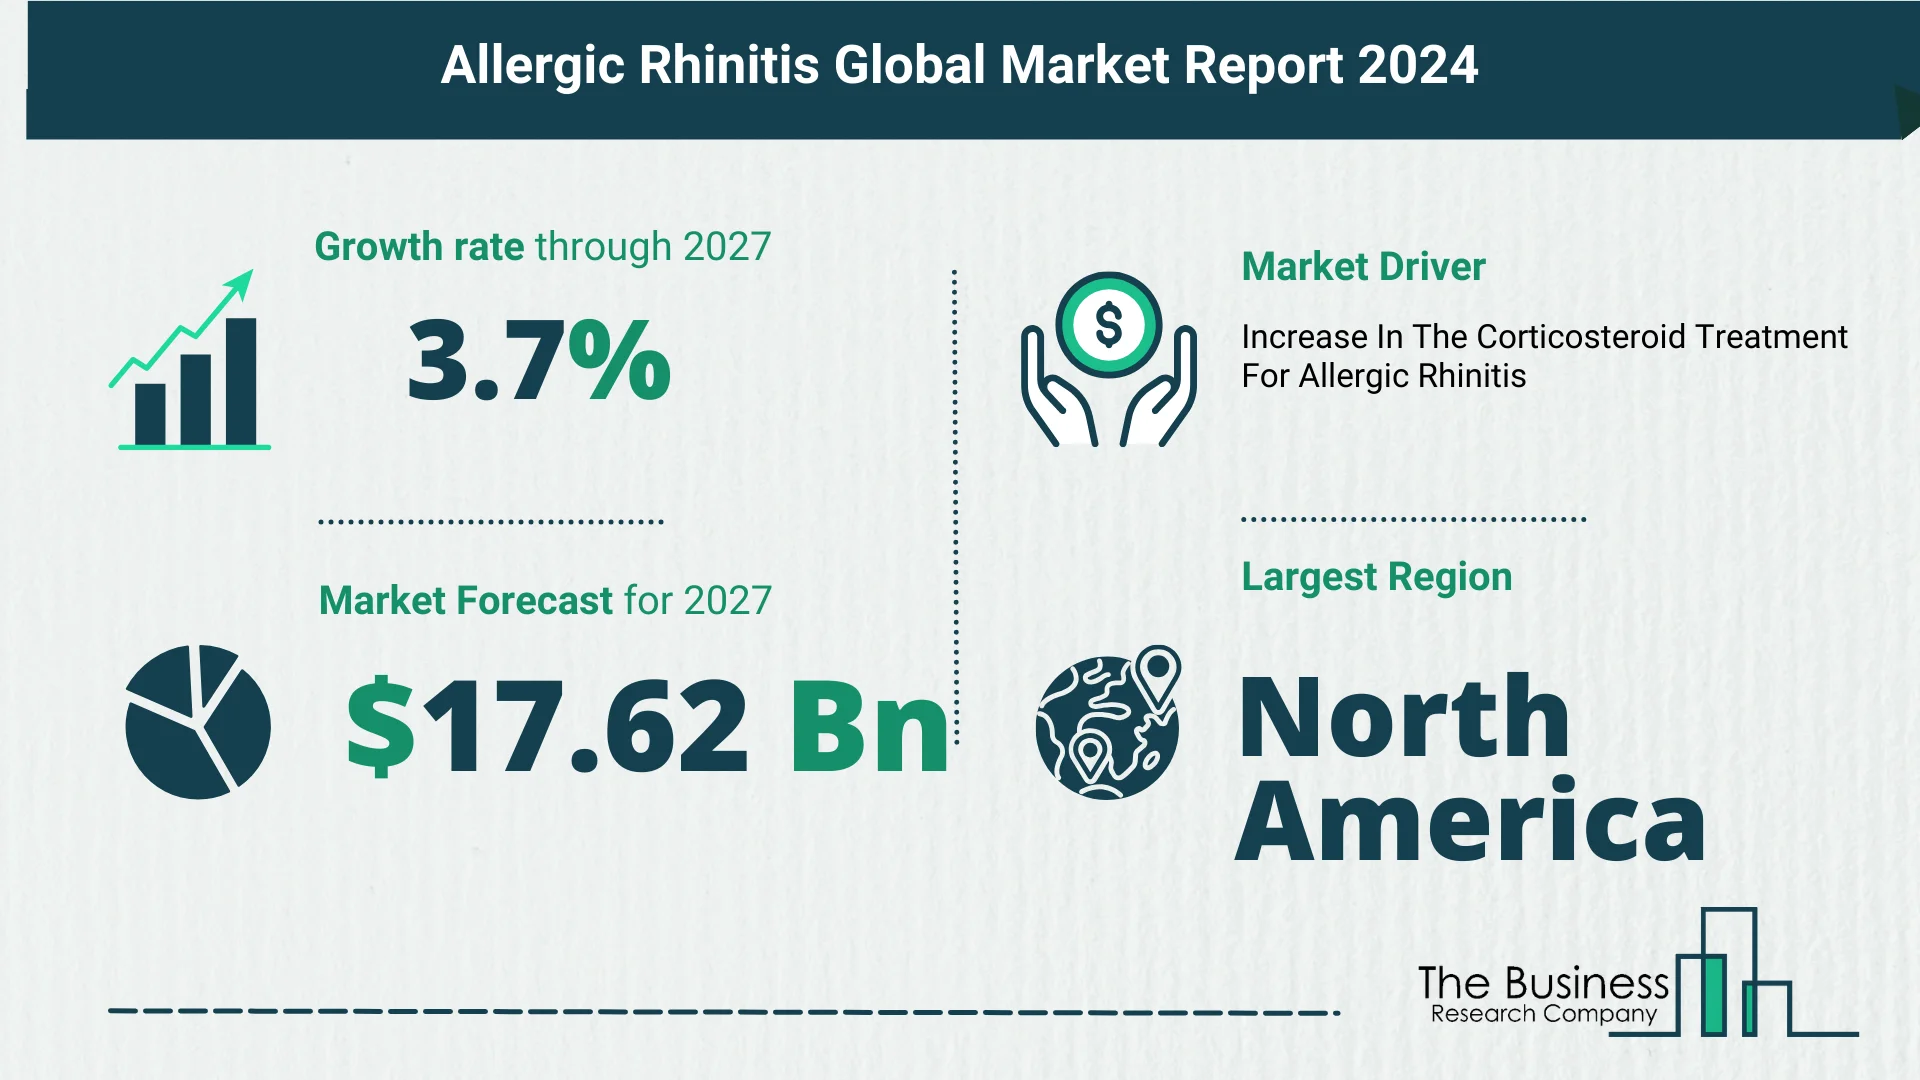 Global Allergic Rhinitis Market Analysis: Estimated Market Size And Growth Rate